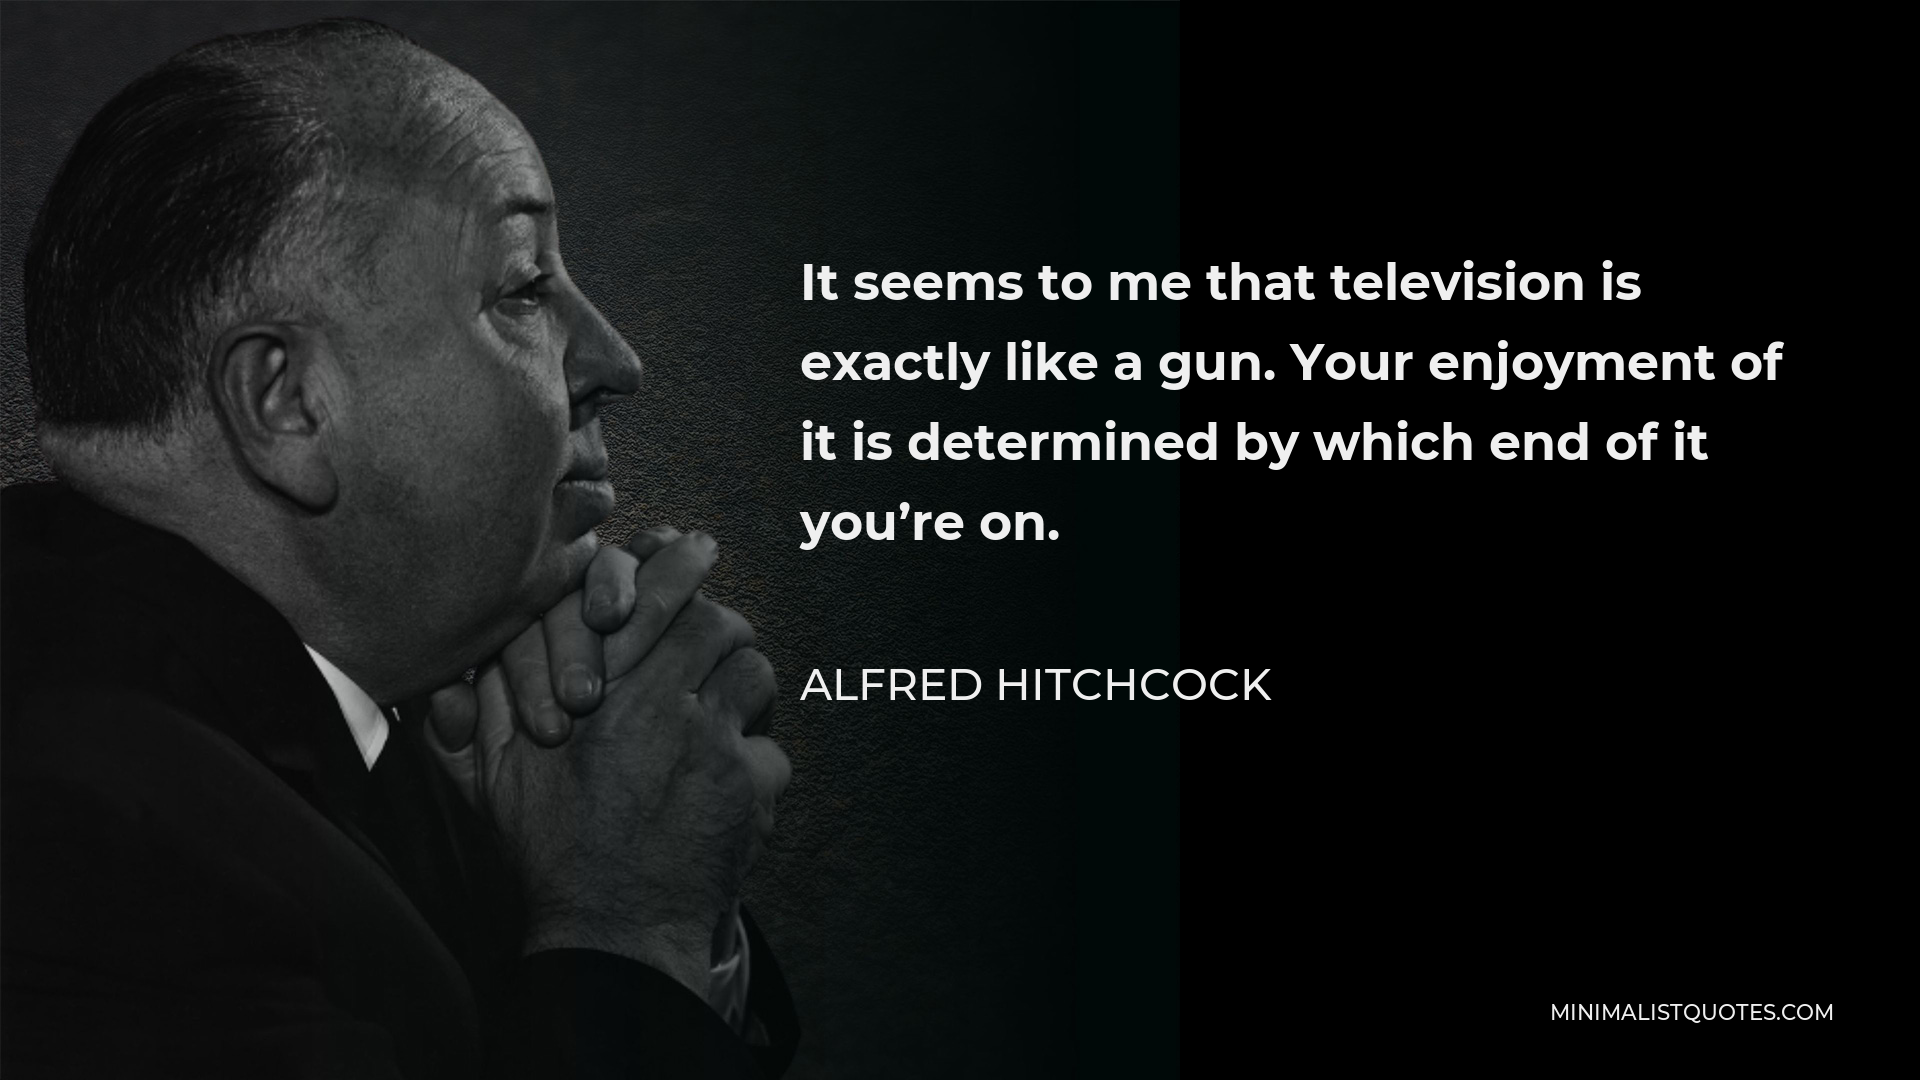 Alfred Hitchcock Quote - It seems to me that television is exactly like a gun. Your enjoyment of it is determined by which end of it you’re on.